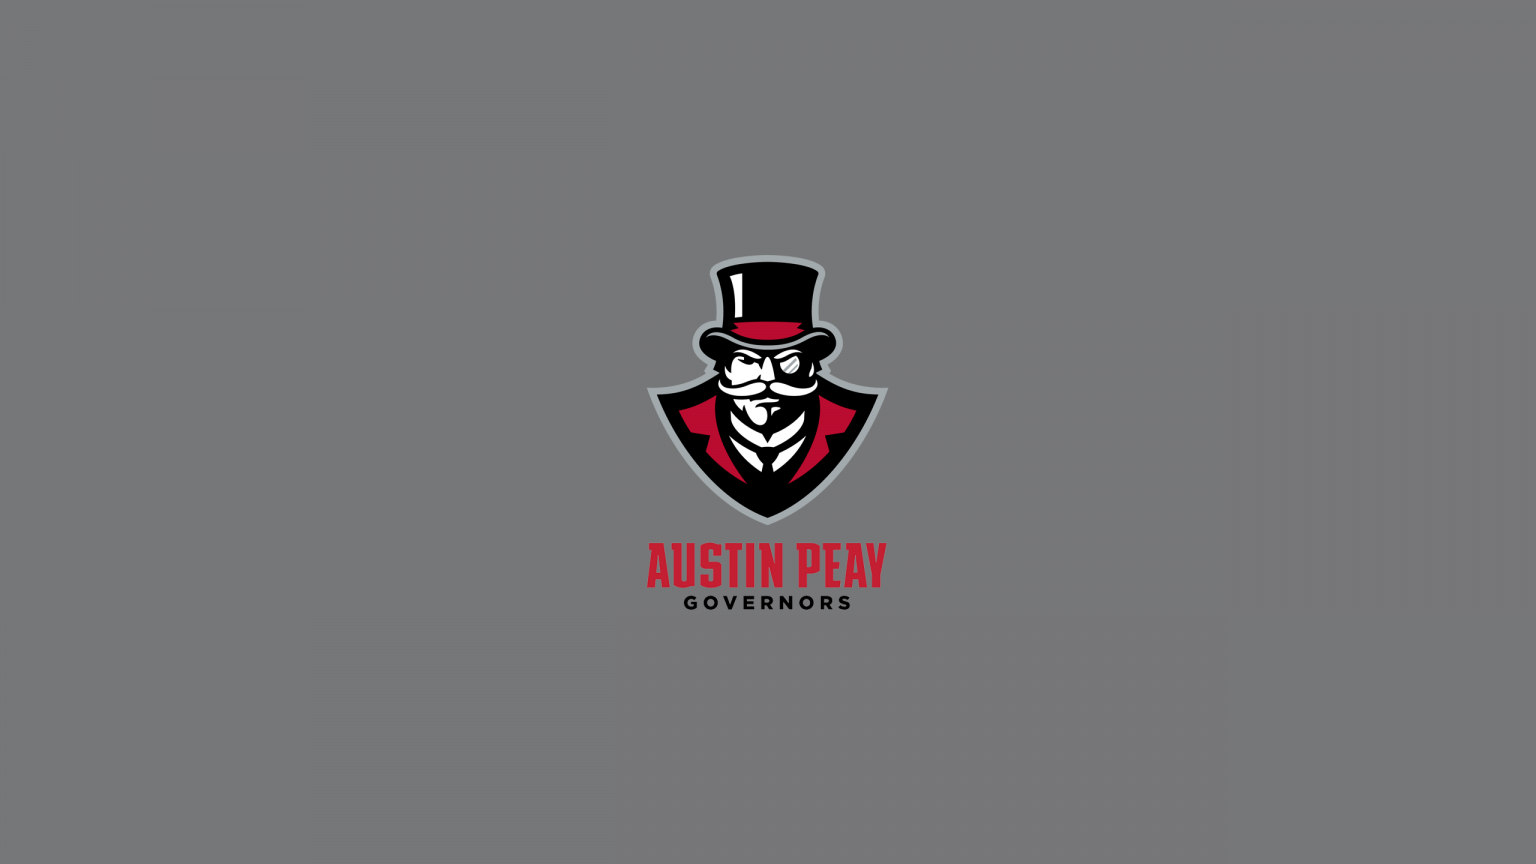 Austin Peay Governors Basketball - NCAAB - Square Bettor